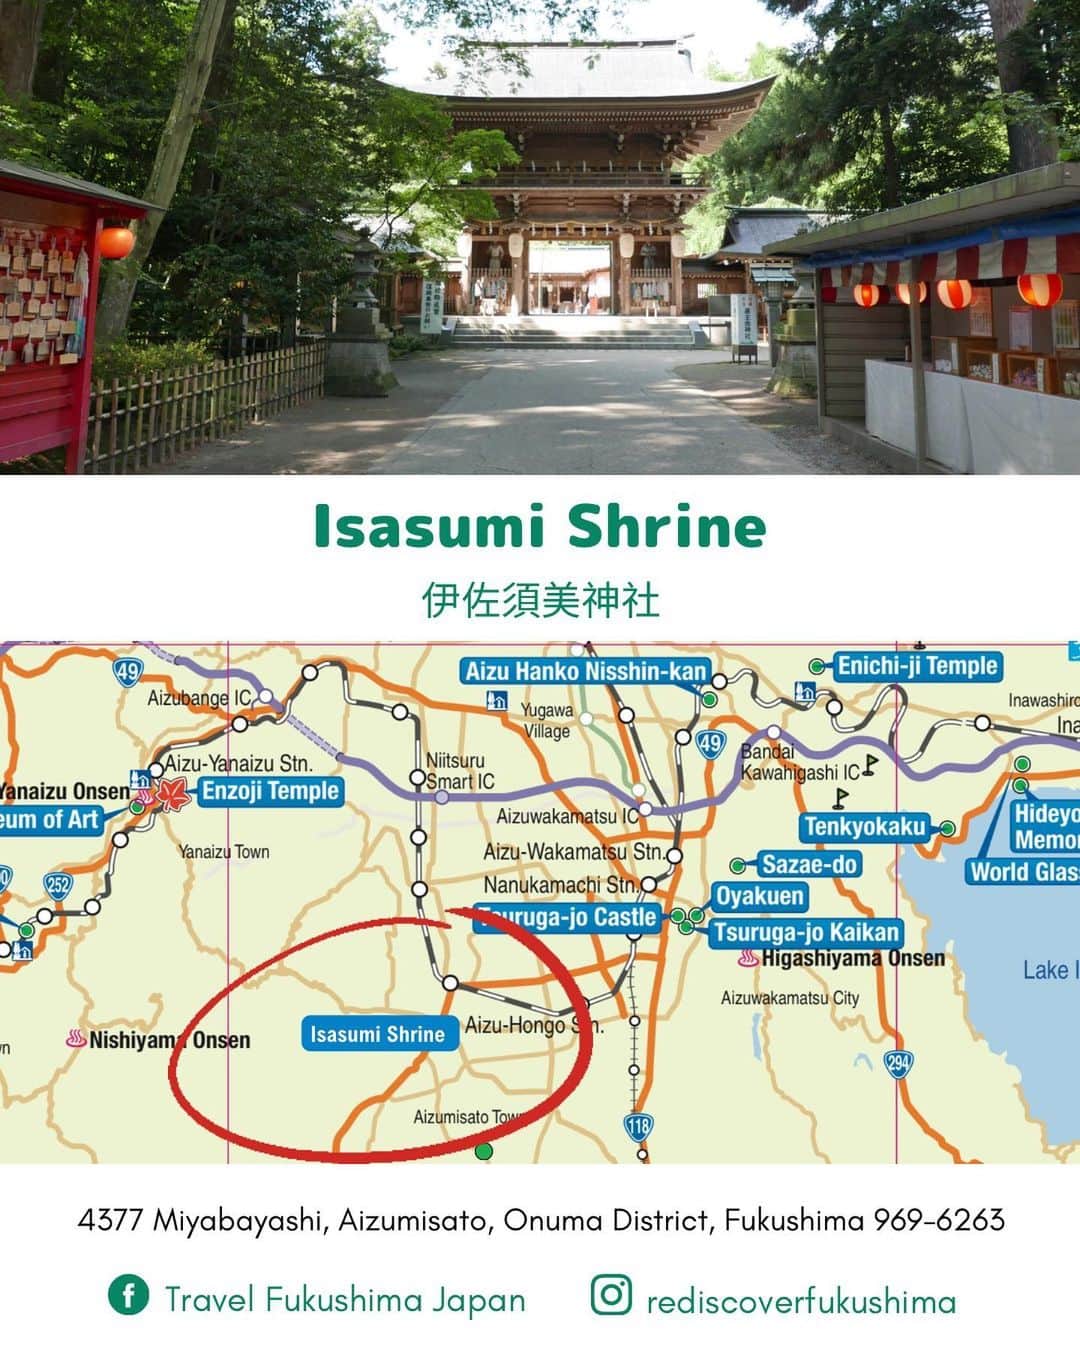 Rediscover Fukushimaさんのインスタグラム写真 - (Rediscover FukushimaInstagram)「Isasumi Shrine's history is thought to be connected to how the Aizu region got its name - a story that has been recorded in two of Japan’s most legendary books of folklore.   According to the tale, around 2000 years ago, four shogun were entrusted with uniting the four areas of land which would become Japan. Two of these shogun happened to be father and son. One was sent to the north-east, and the other to the north-west.  When the father and son had completed their work uniting the towns in their respective areas, they met in the middle. They named the area “Aizu” (会津), which can be translated as “The riverbank (津) where we met (会)”. The father and son travelled to Mt. Mikagura-dake, a mountain that borders Niigata Prefecture and Aizu, and prayed to the shinto god of pioneering new lands to protect Aizu, and the rest of Japan. Isasumi Shrine is thought to be built where they met.  Today we were live on Facebook strolling through Isasumi Shrine’s Iris Festival, which goes until July 5th (Wednesday next week!). You can find a link to the video on our stories.   Seasonal flowers at the shrine:  ▪️Iris (iris garden outside Isasumi Shrine): Mid-Jun. to early Jul.  ▪️Usuzumi Sakura Cherry Blossom: Late Apr. to early May  ▪️Japanese Wisteria: Mid-May  ▪️Hydrangea: Mid-July  🍁 It also looks striking during autumn!   Don’t forget to save this post for your next visit to Isasumi Shrine!   We were also live from Ouchi-juku’s soba dojo today, where we tried our hand making soba noodles! Please check it out if you’re interested. 🥰  #visitfukushima #fukushima #aizumisato #isasumi #isasumishrine #beautiful #photooftheday #tohokucamerafan #visitjapanjp #visitjapanes #visitjapanus #visitjapanuk #visitjapantw #japaneseshrine #japanese #beautifuljapan #japanesearchitecture #summer #summerinjapan #naturephotography #aizu #aizumisato」6月26日 17時15分 - rediscoverfukushima